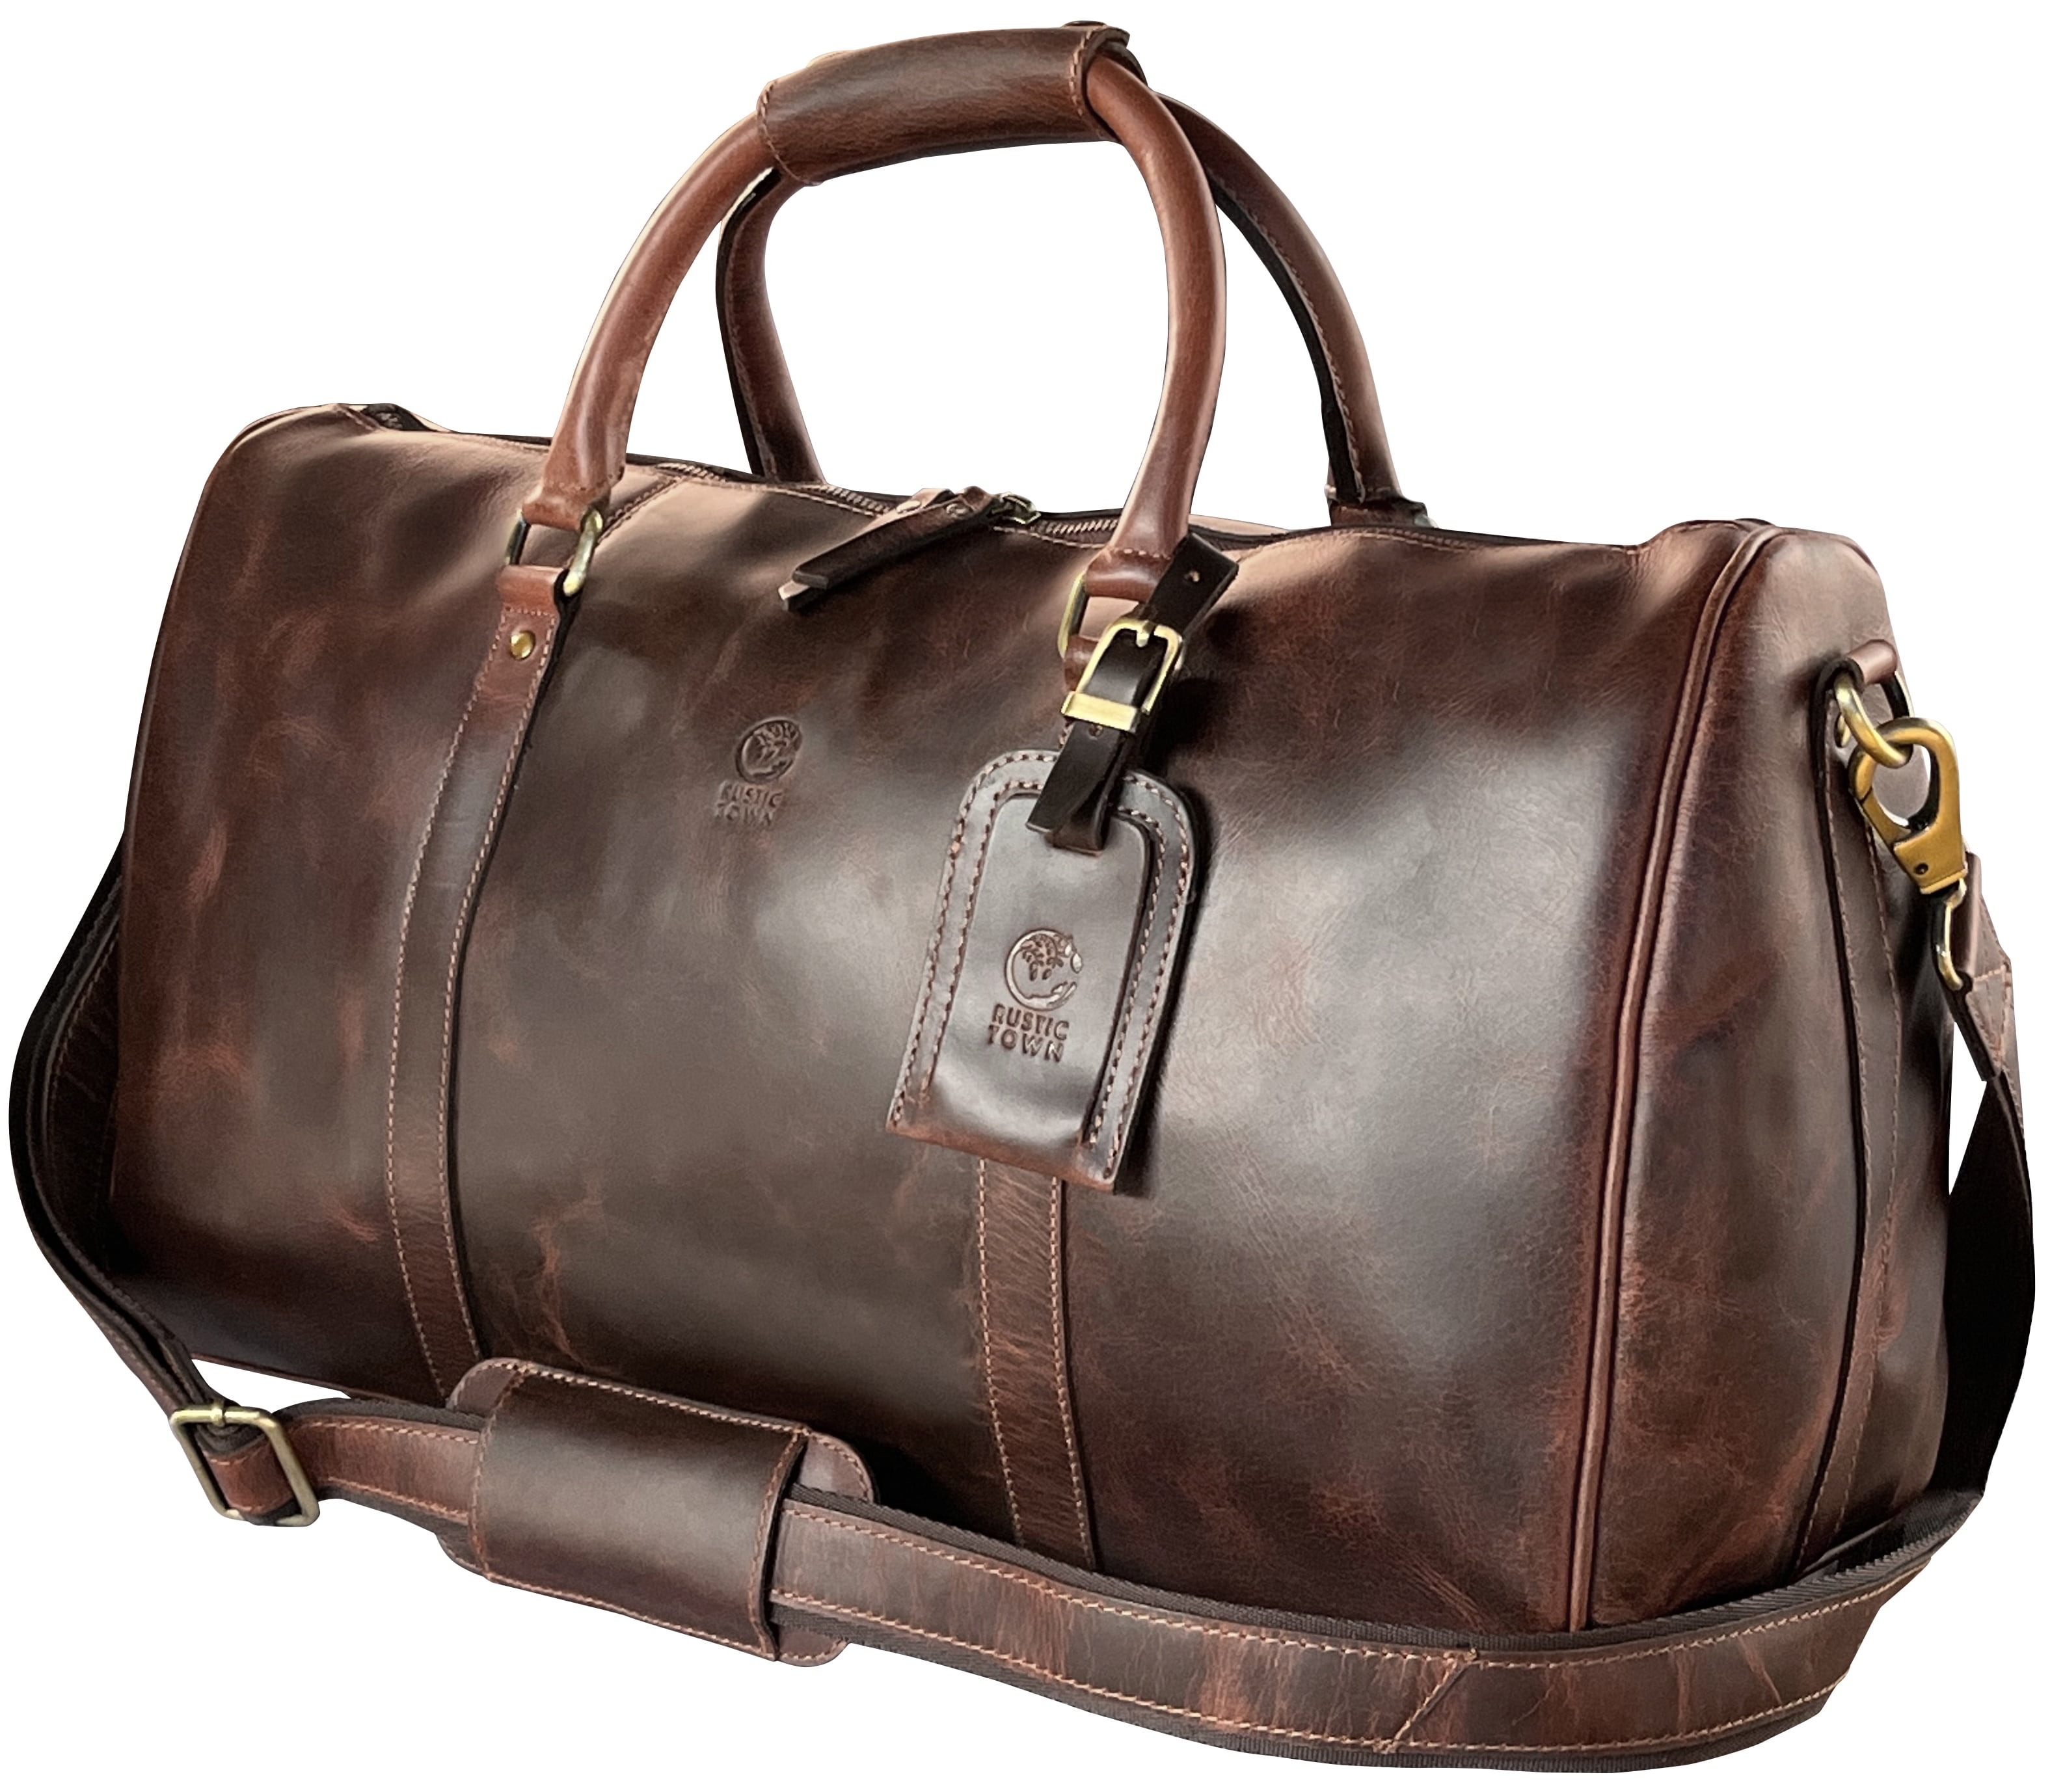 Customized Brown Leather Duffle Bag | Promotionalwears